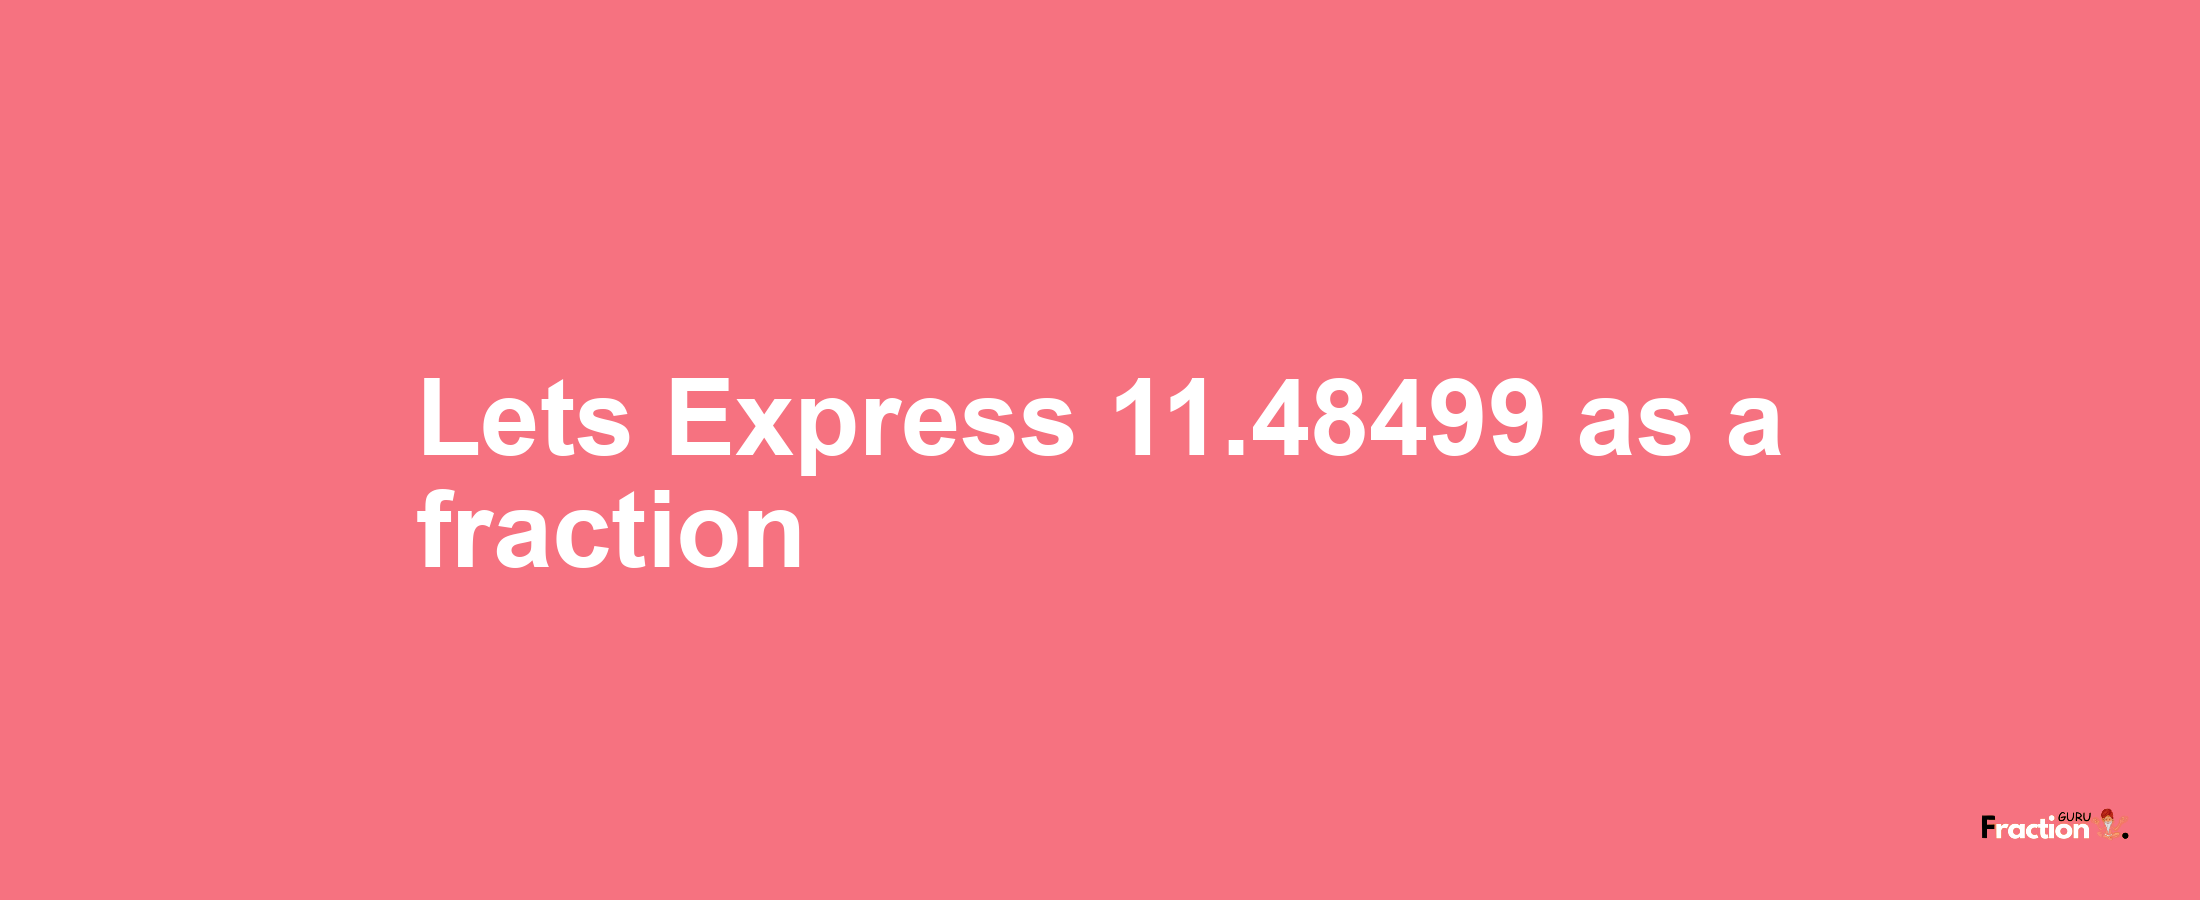 Lets Express 11.48499 as afraction